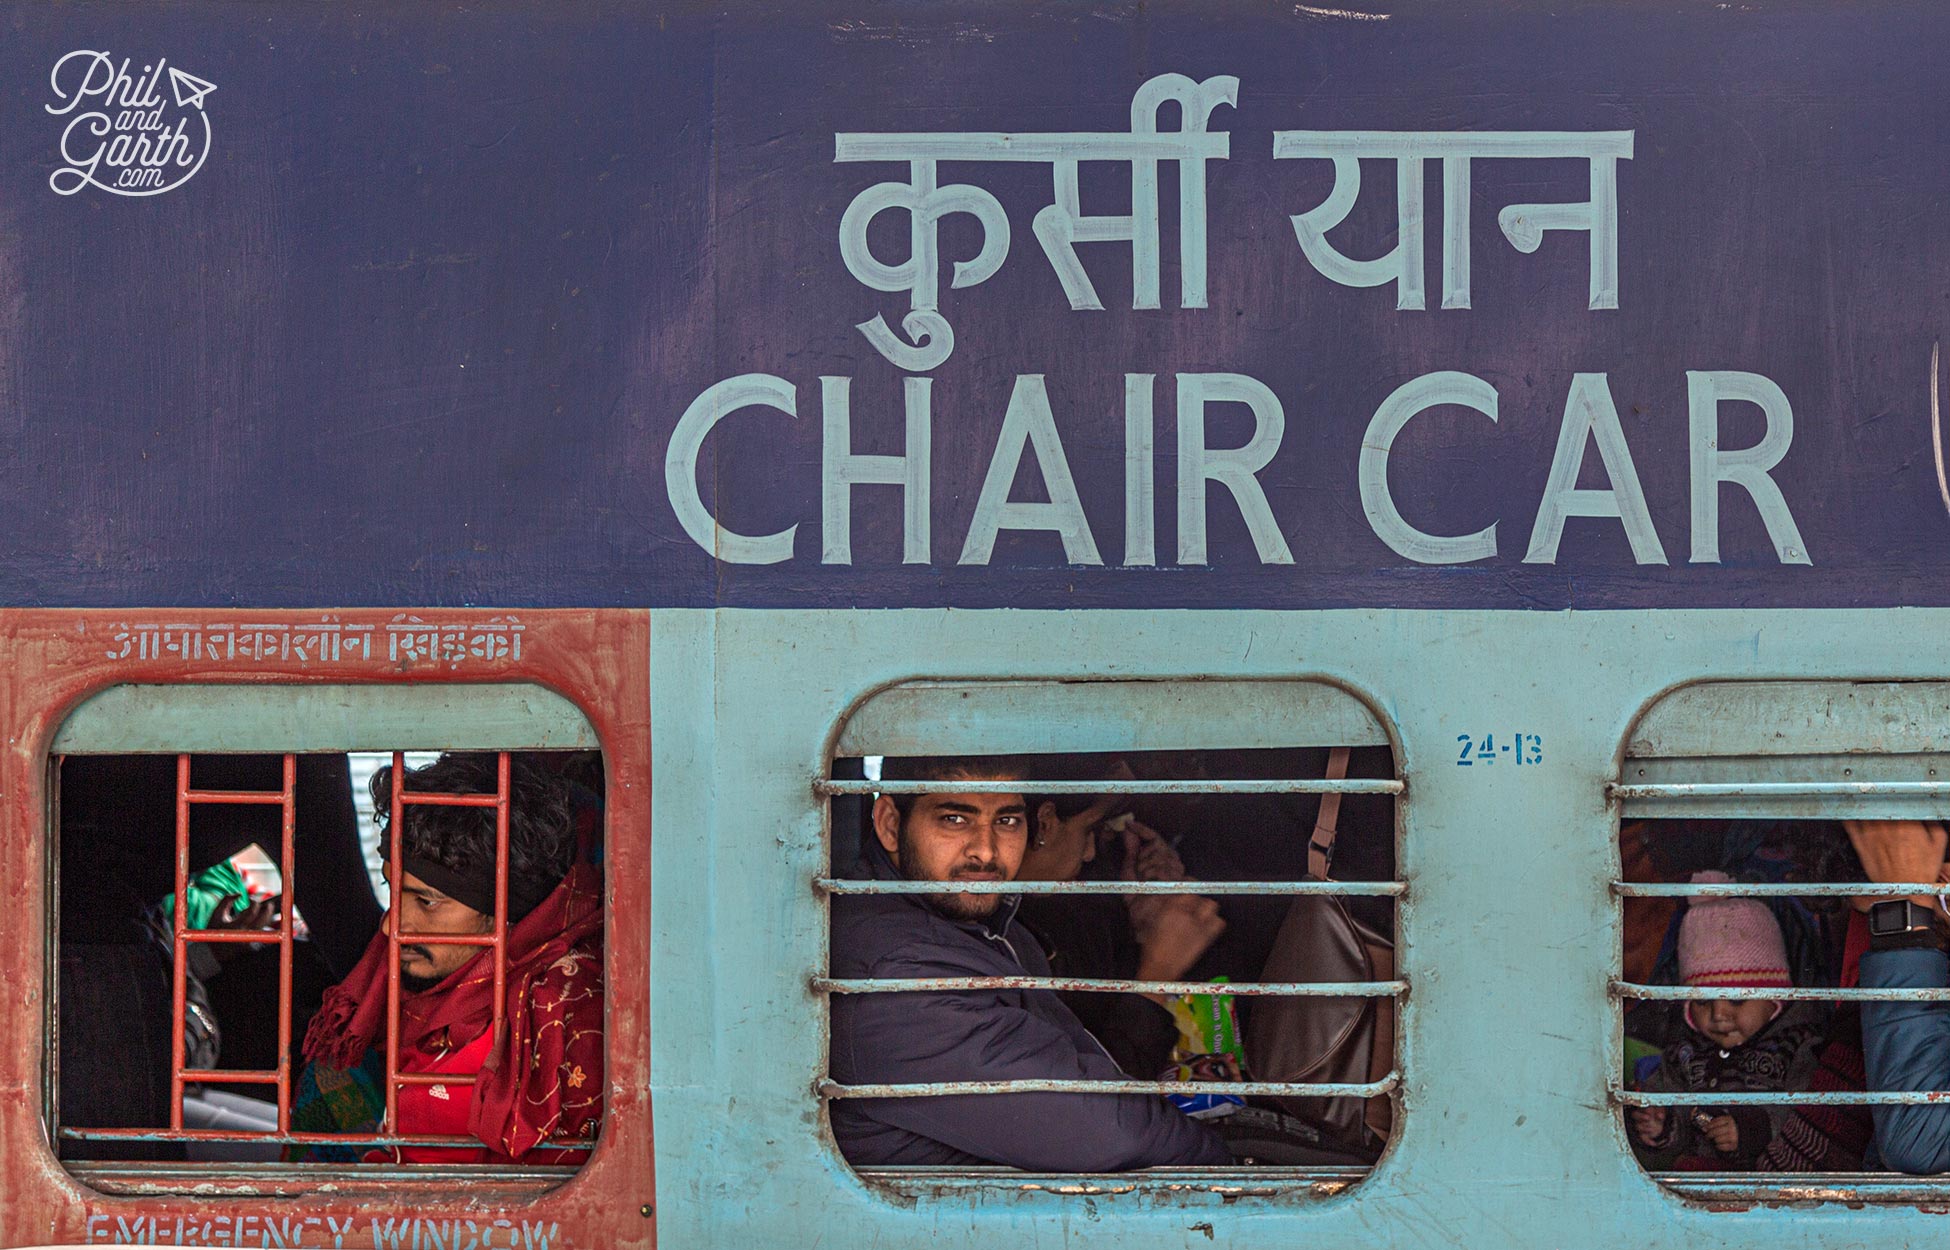 An Indian Railways Chair Class carriage. The bars on the windows are to stop people from outside getting in for free